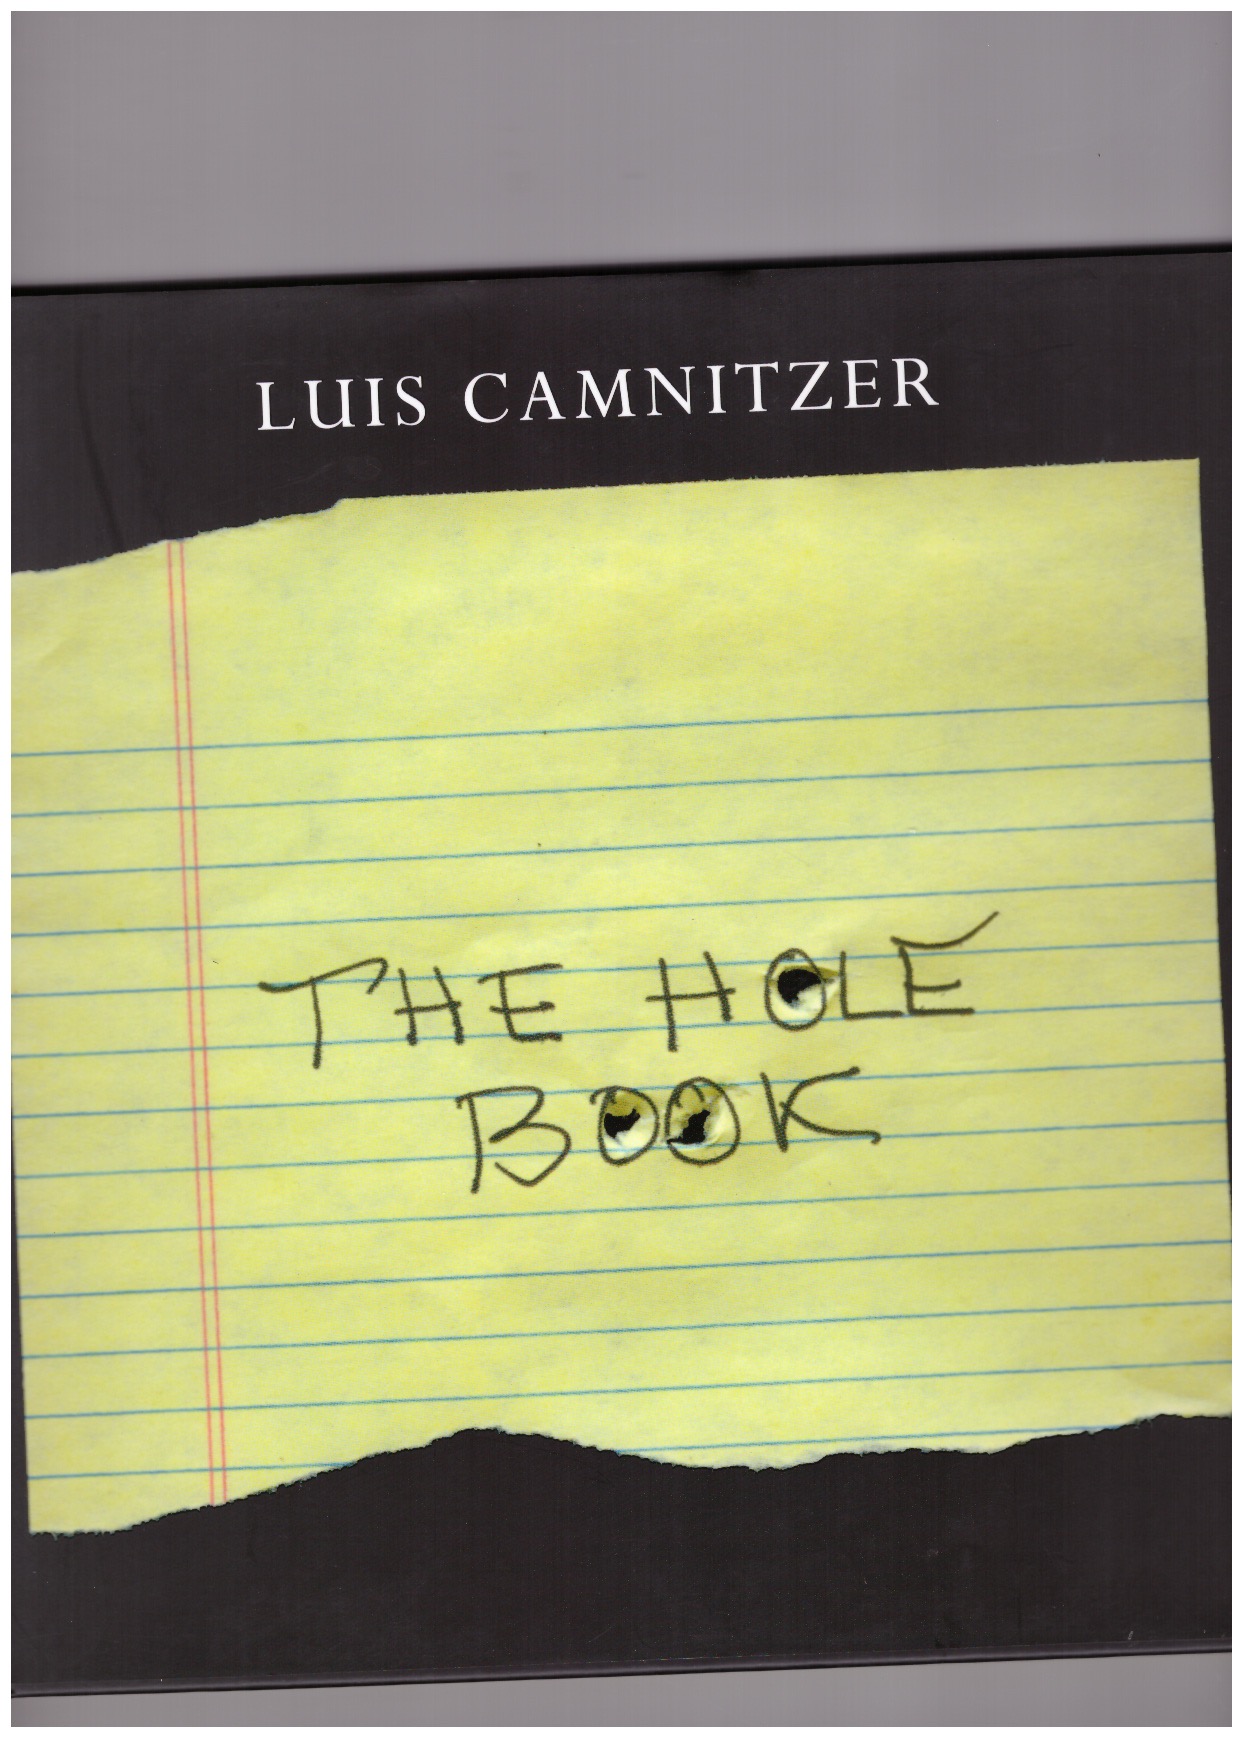 CAMNITZER, Luis - The Hole Book